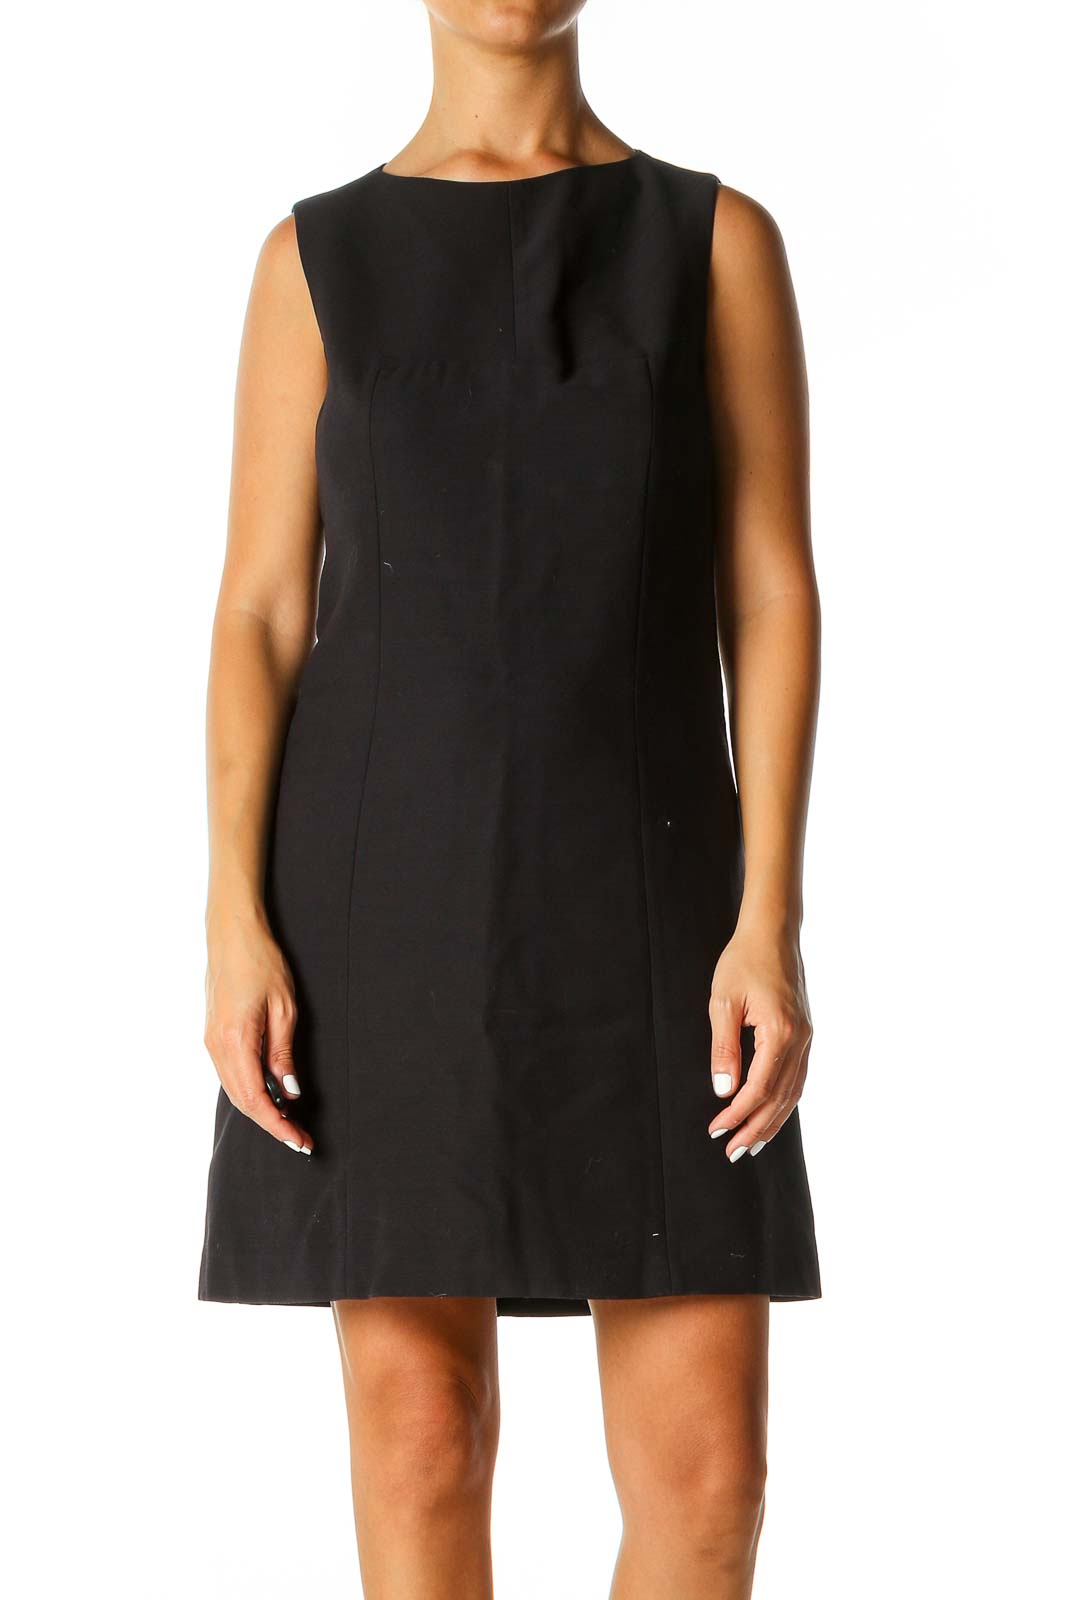 Blue Solid Chic Shift Dress Front